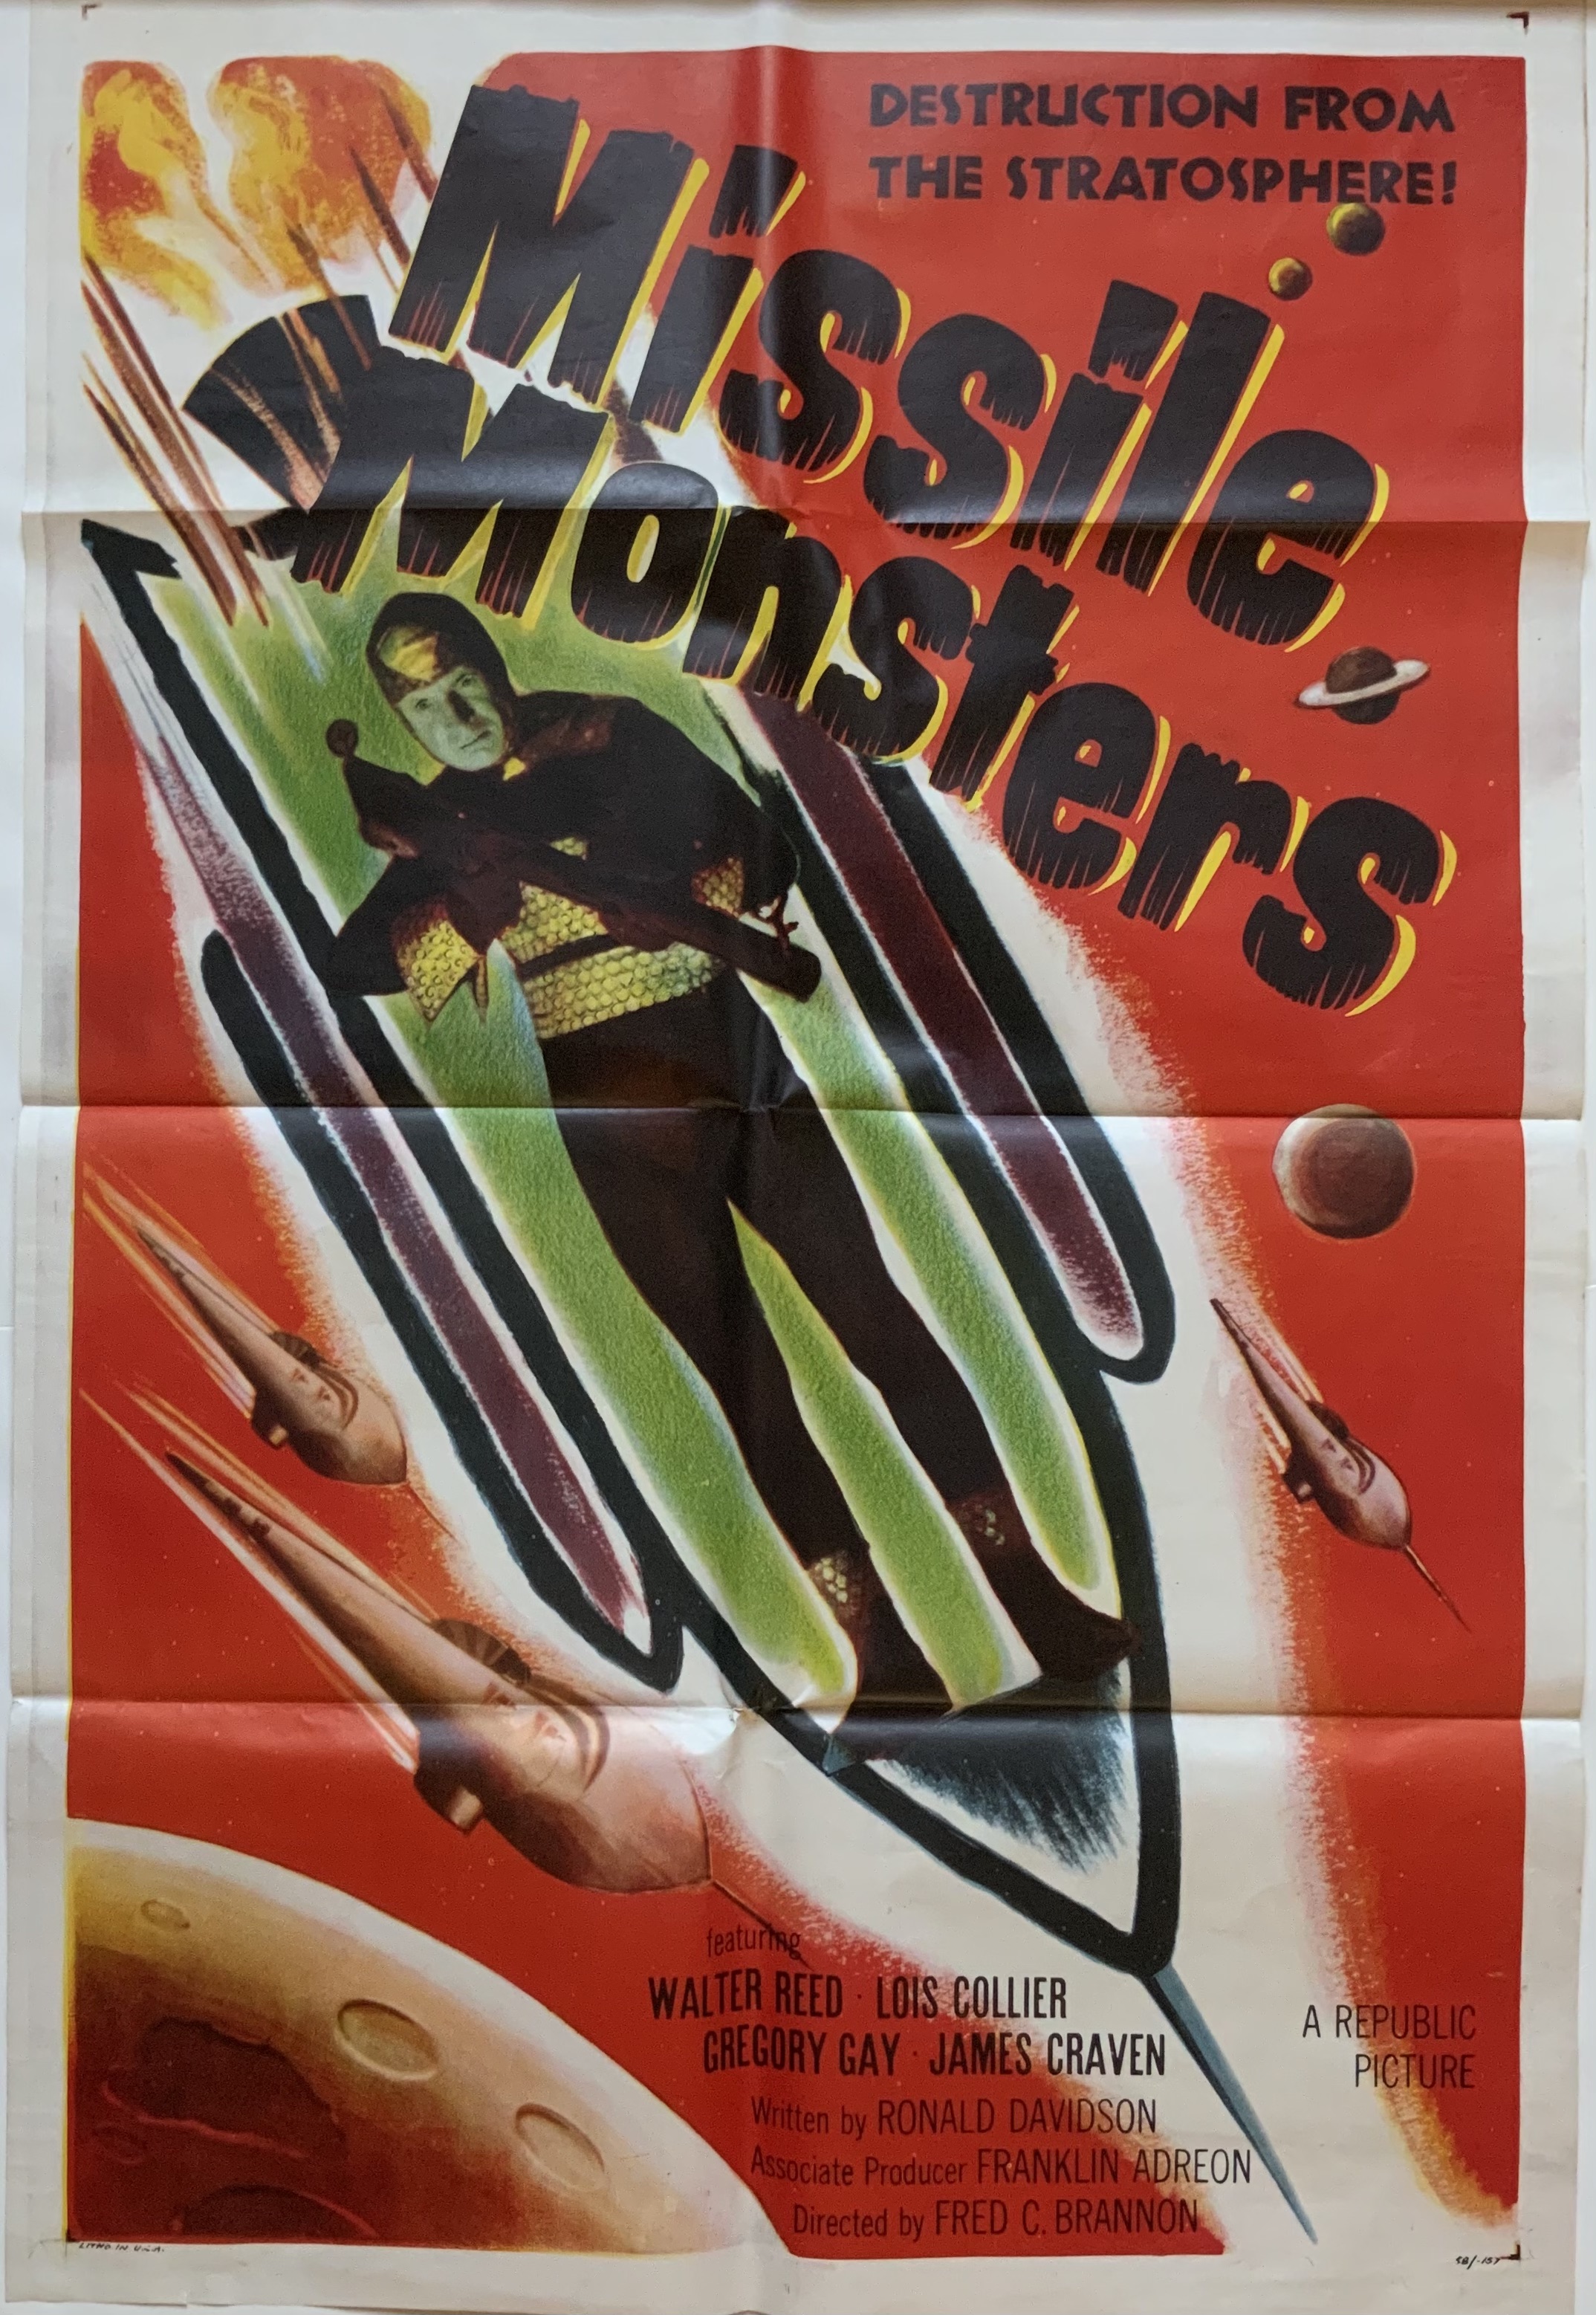 J896	MISSILE MONSTERS 1958 “DESTRUCTION FROM THE STRATOSPHERE!”